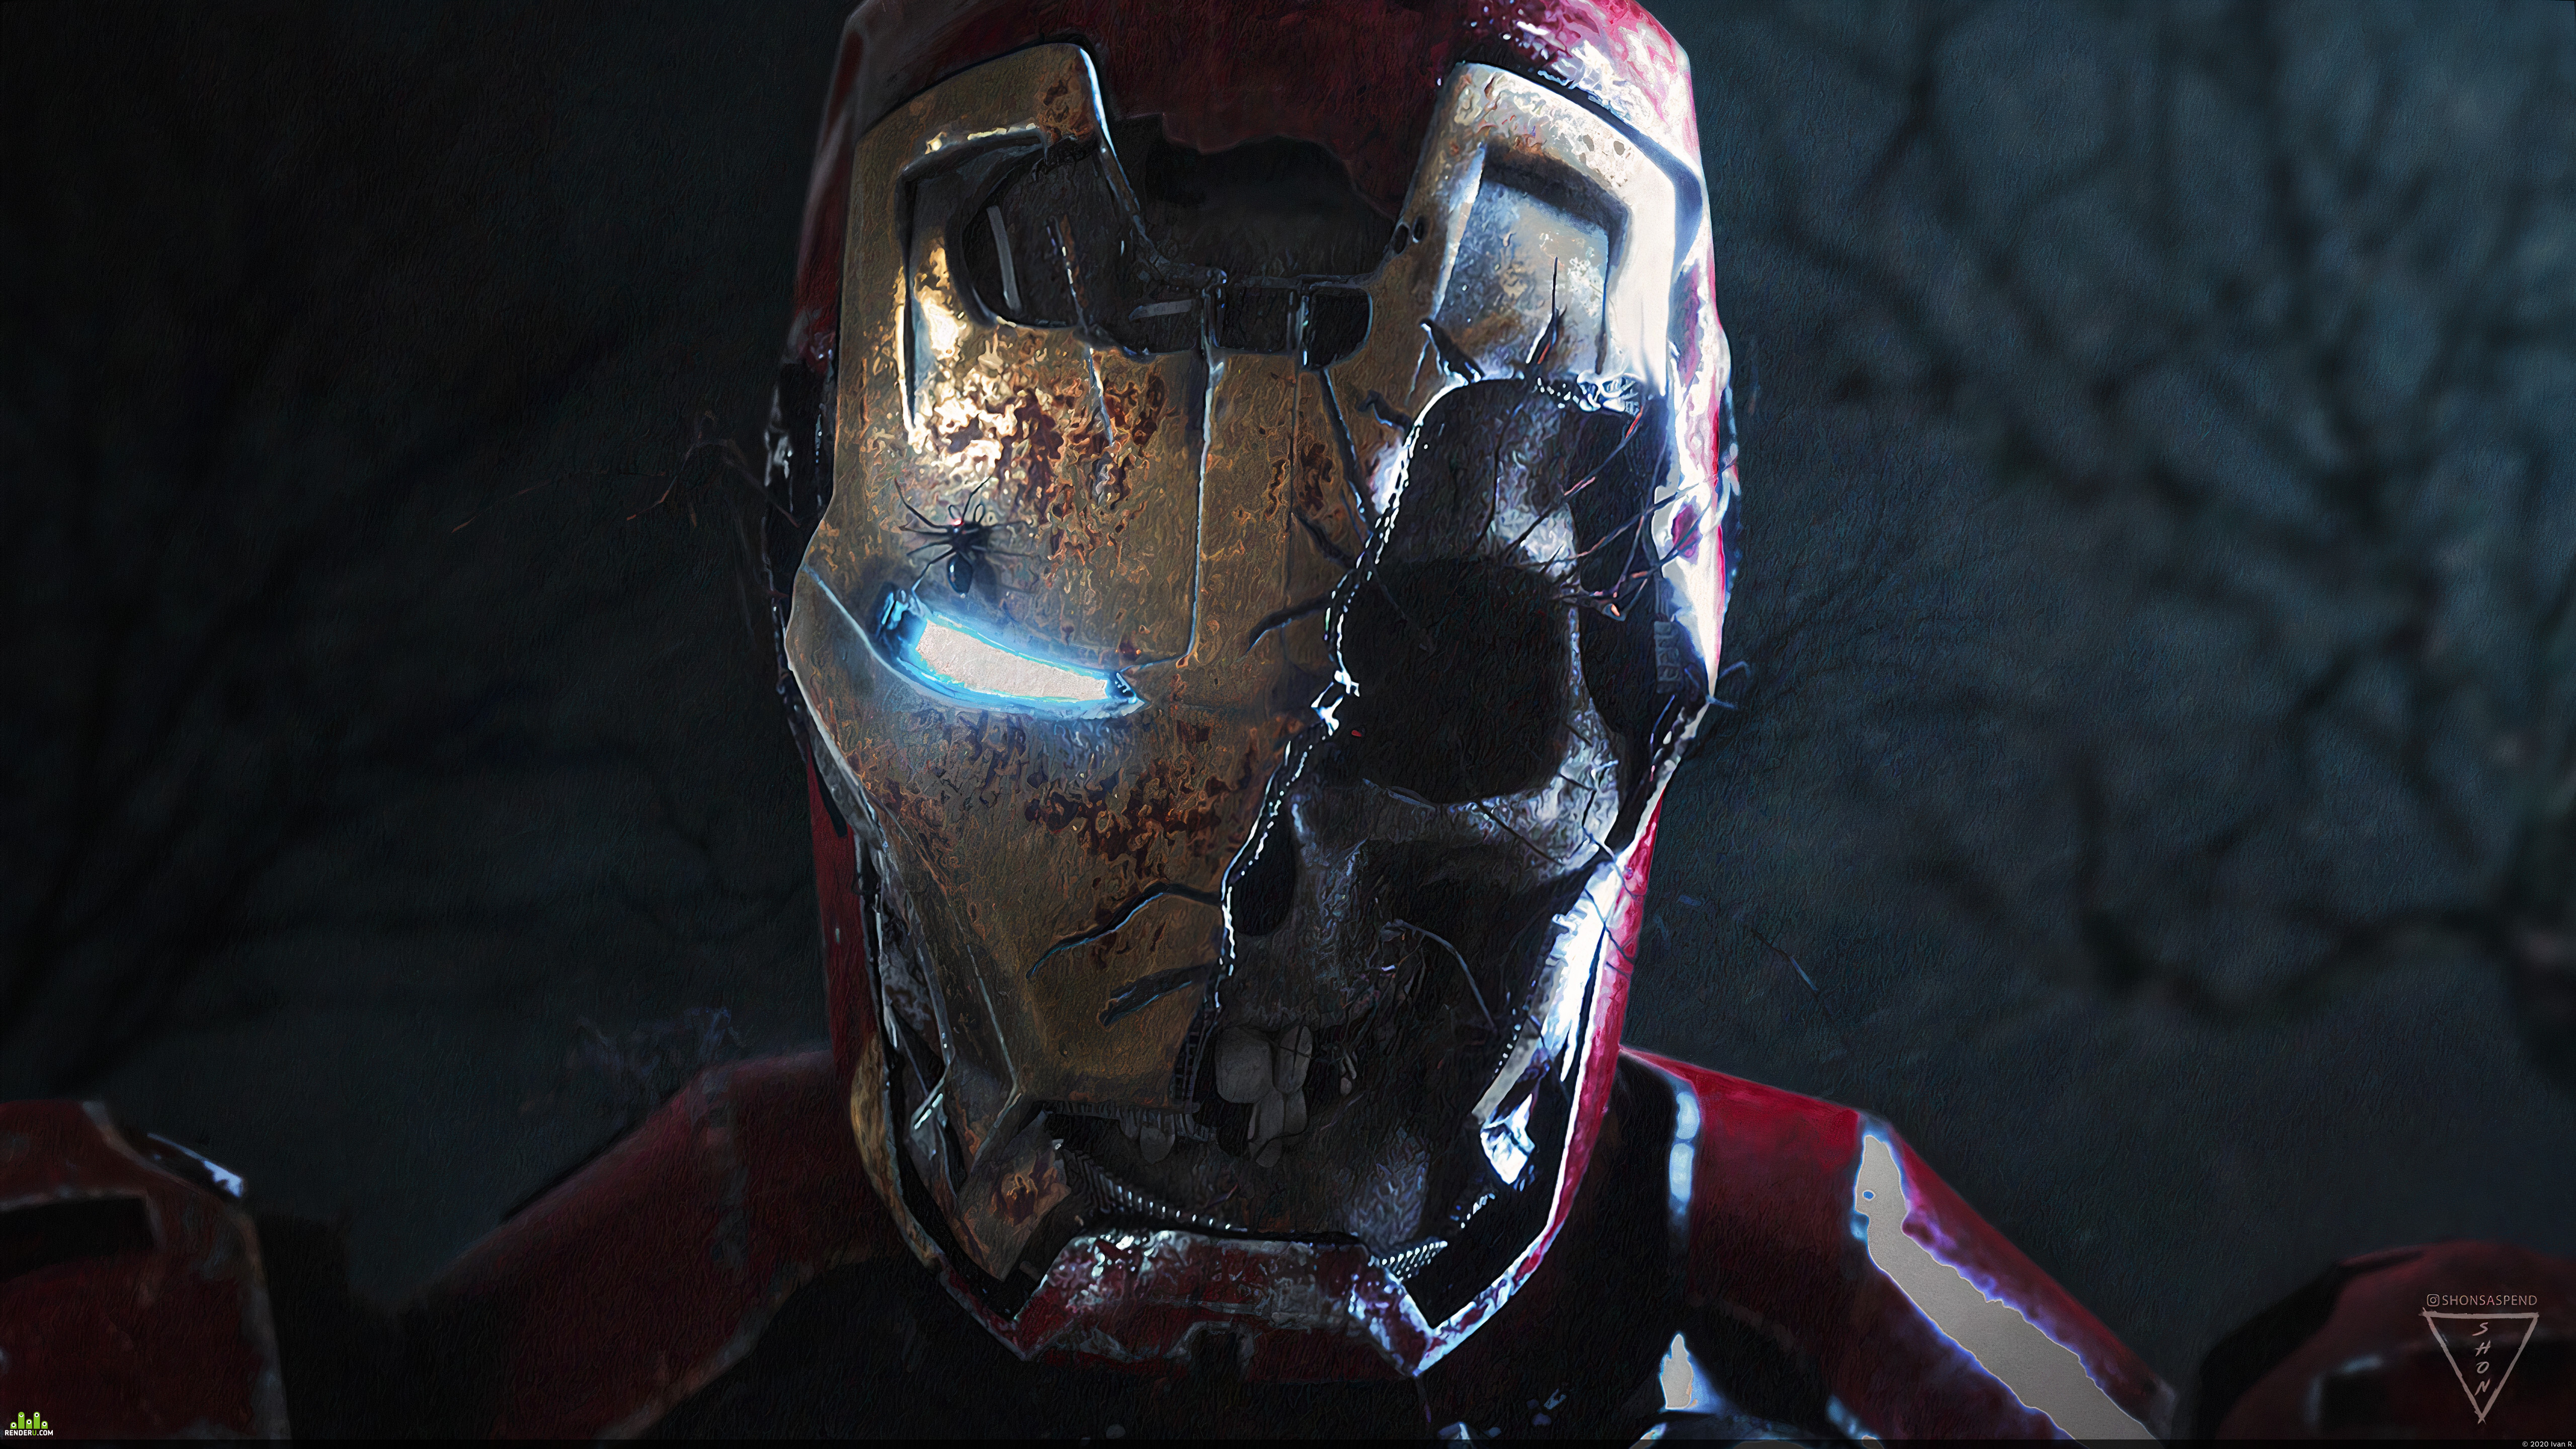 Zombie Iron Man In Spider-Man Wallpapers